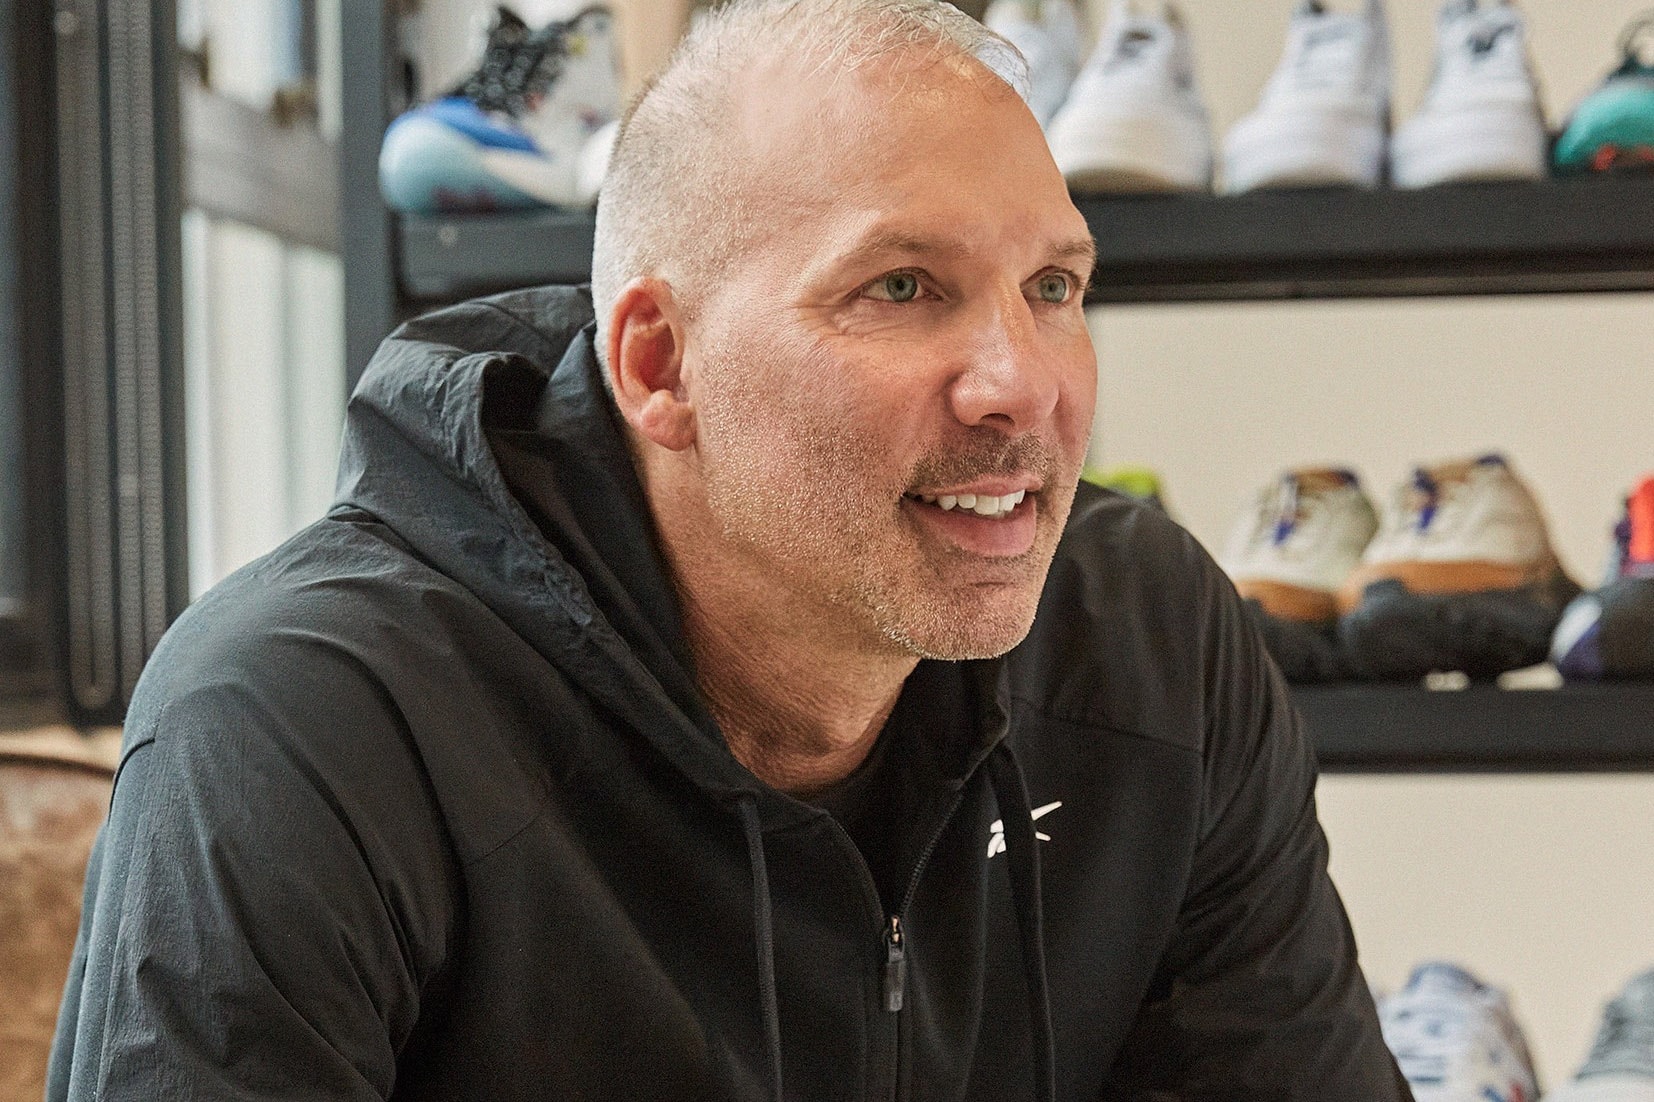 Reebok Appoints Todd Krinsky As New CEO sparc group authentic brands reebok design group classics intern news info 